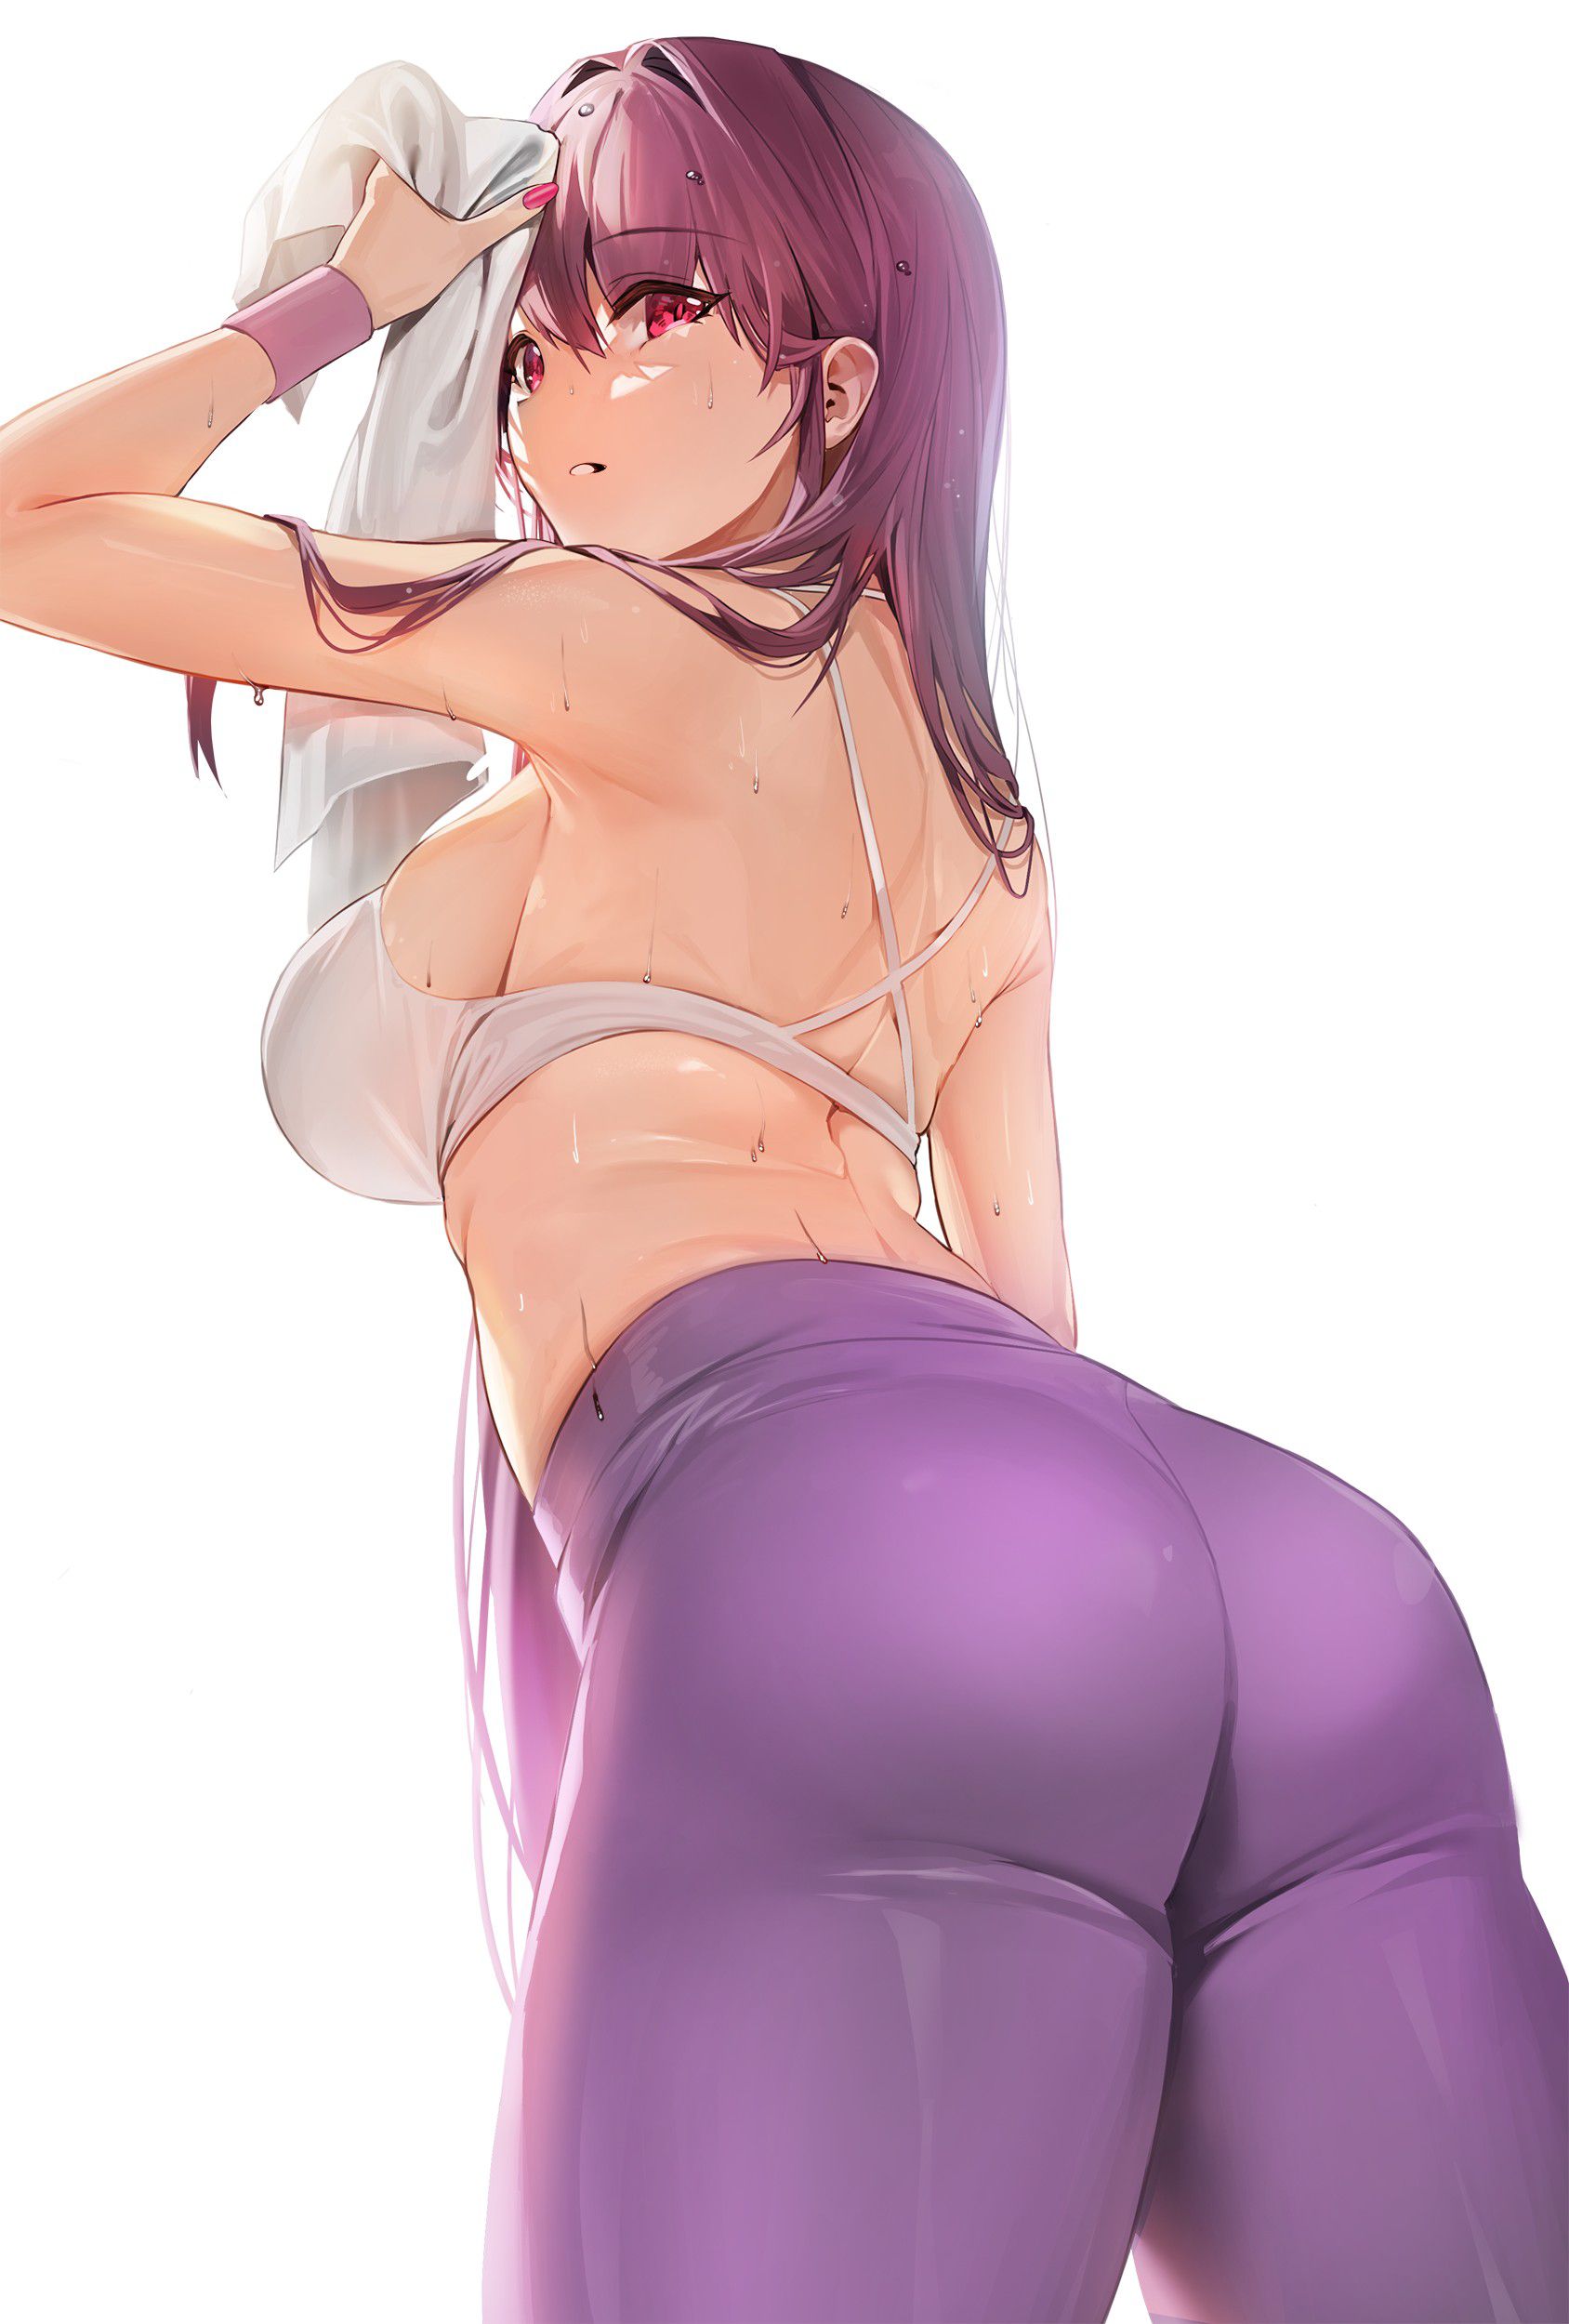 【2nd】Erotic image of a girl sweating Part 39 18